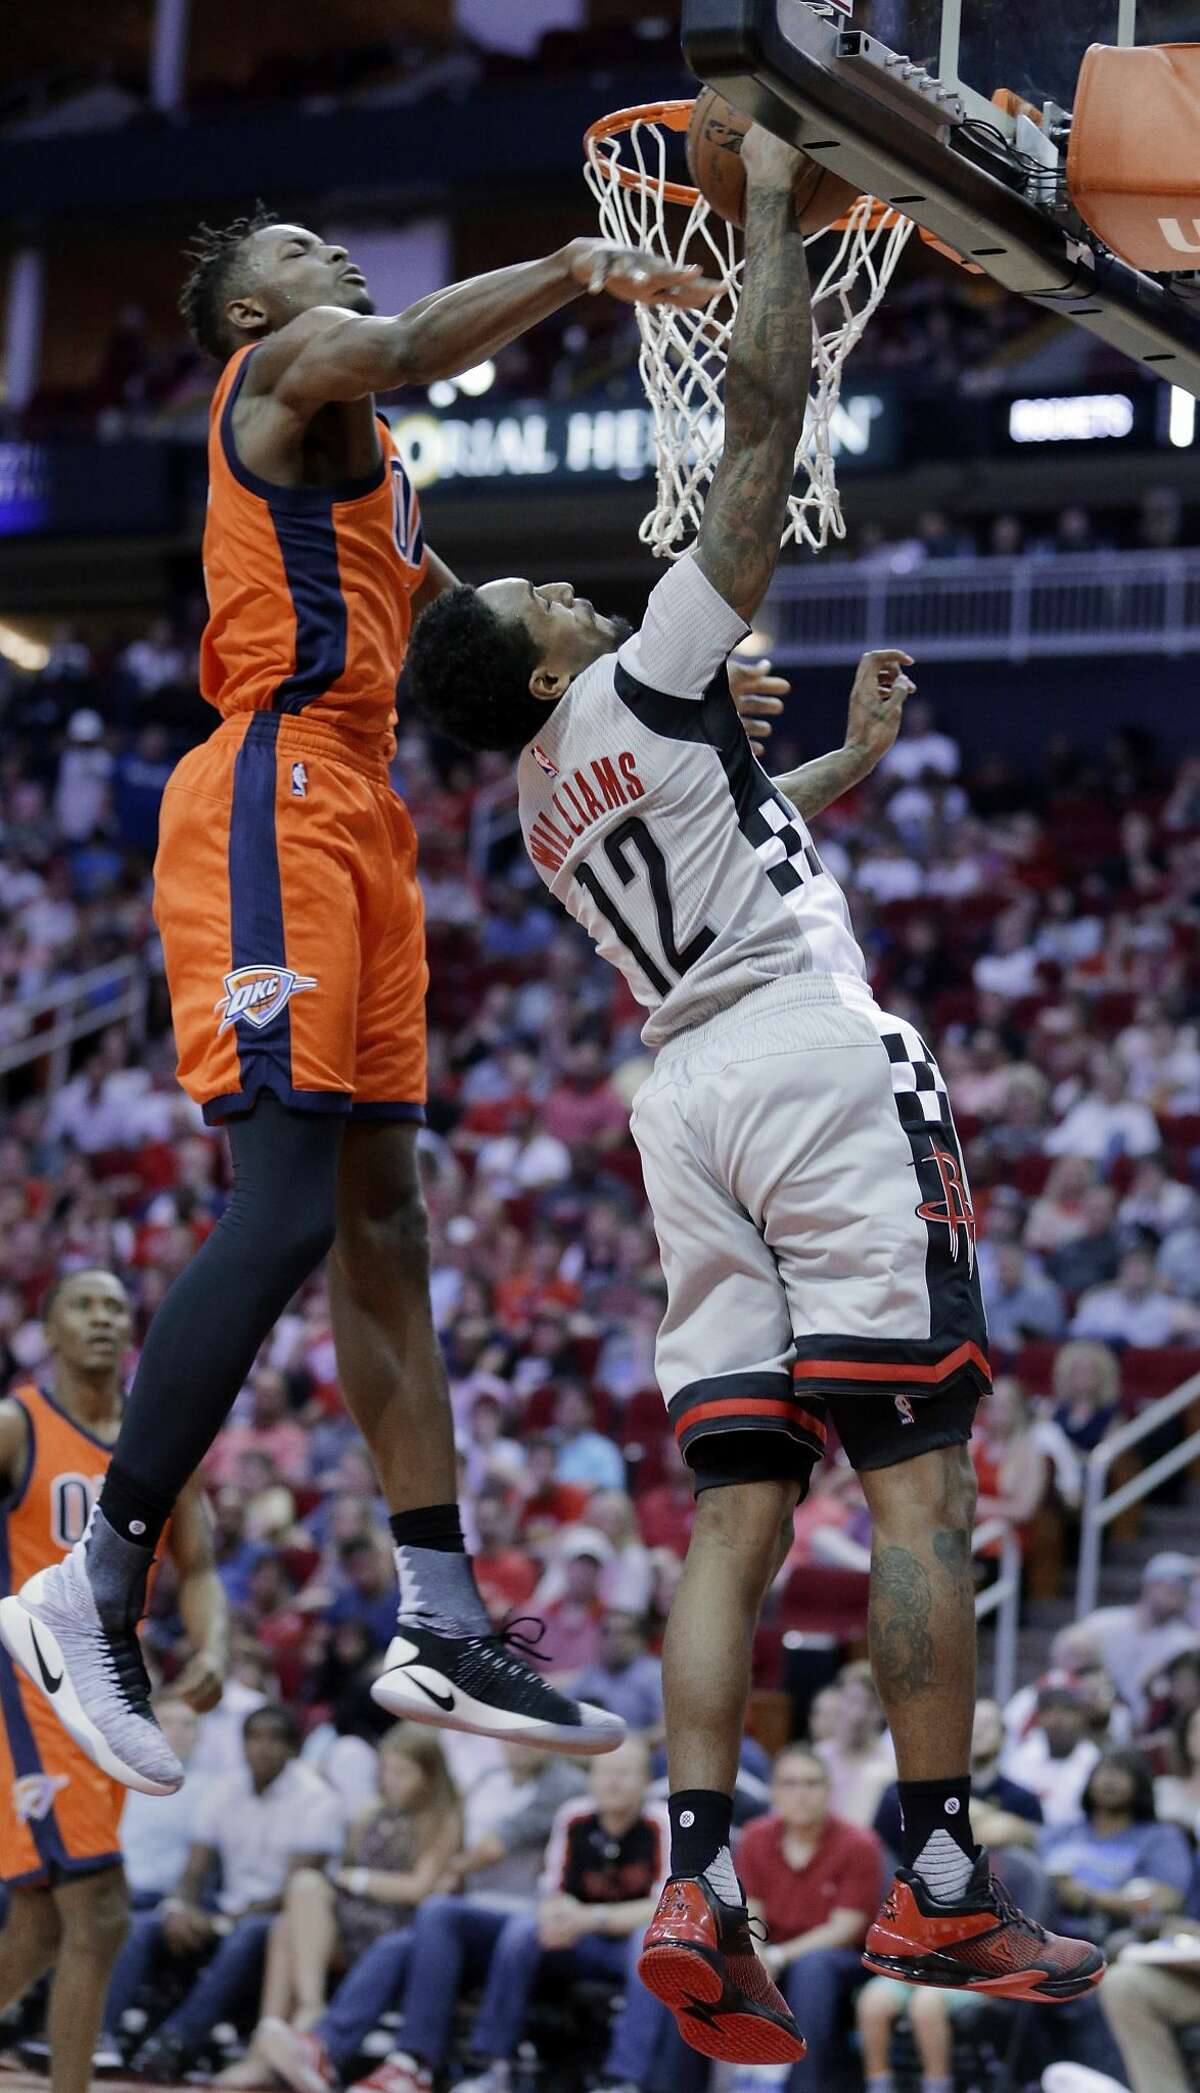 Oklahoma City Thunder's Jerami Grant (9) bats away a shot attempt by Houston Rockets' Lou Williams (12) during the second half of an NBA basketball game in Houston, Sunday, March 26, 2017. (AP Photo/Michael Wyke)